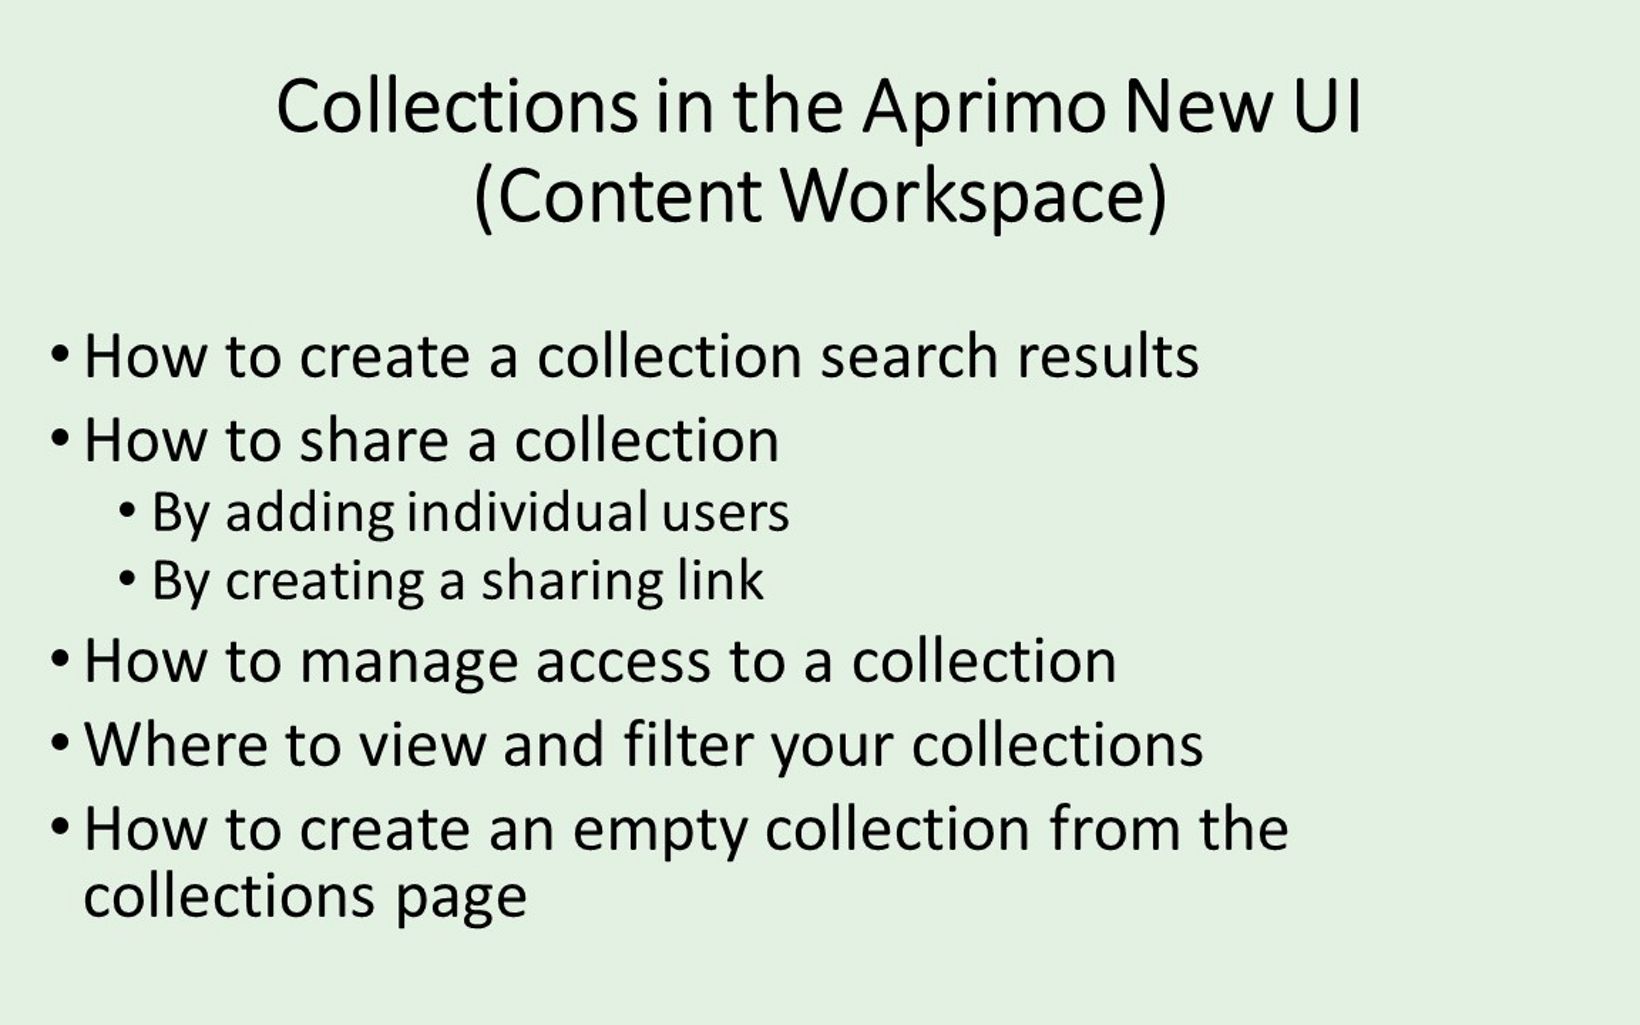 agenda for video on how to create and share collections in new UI Aprimo